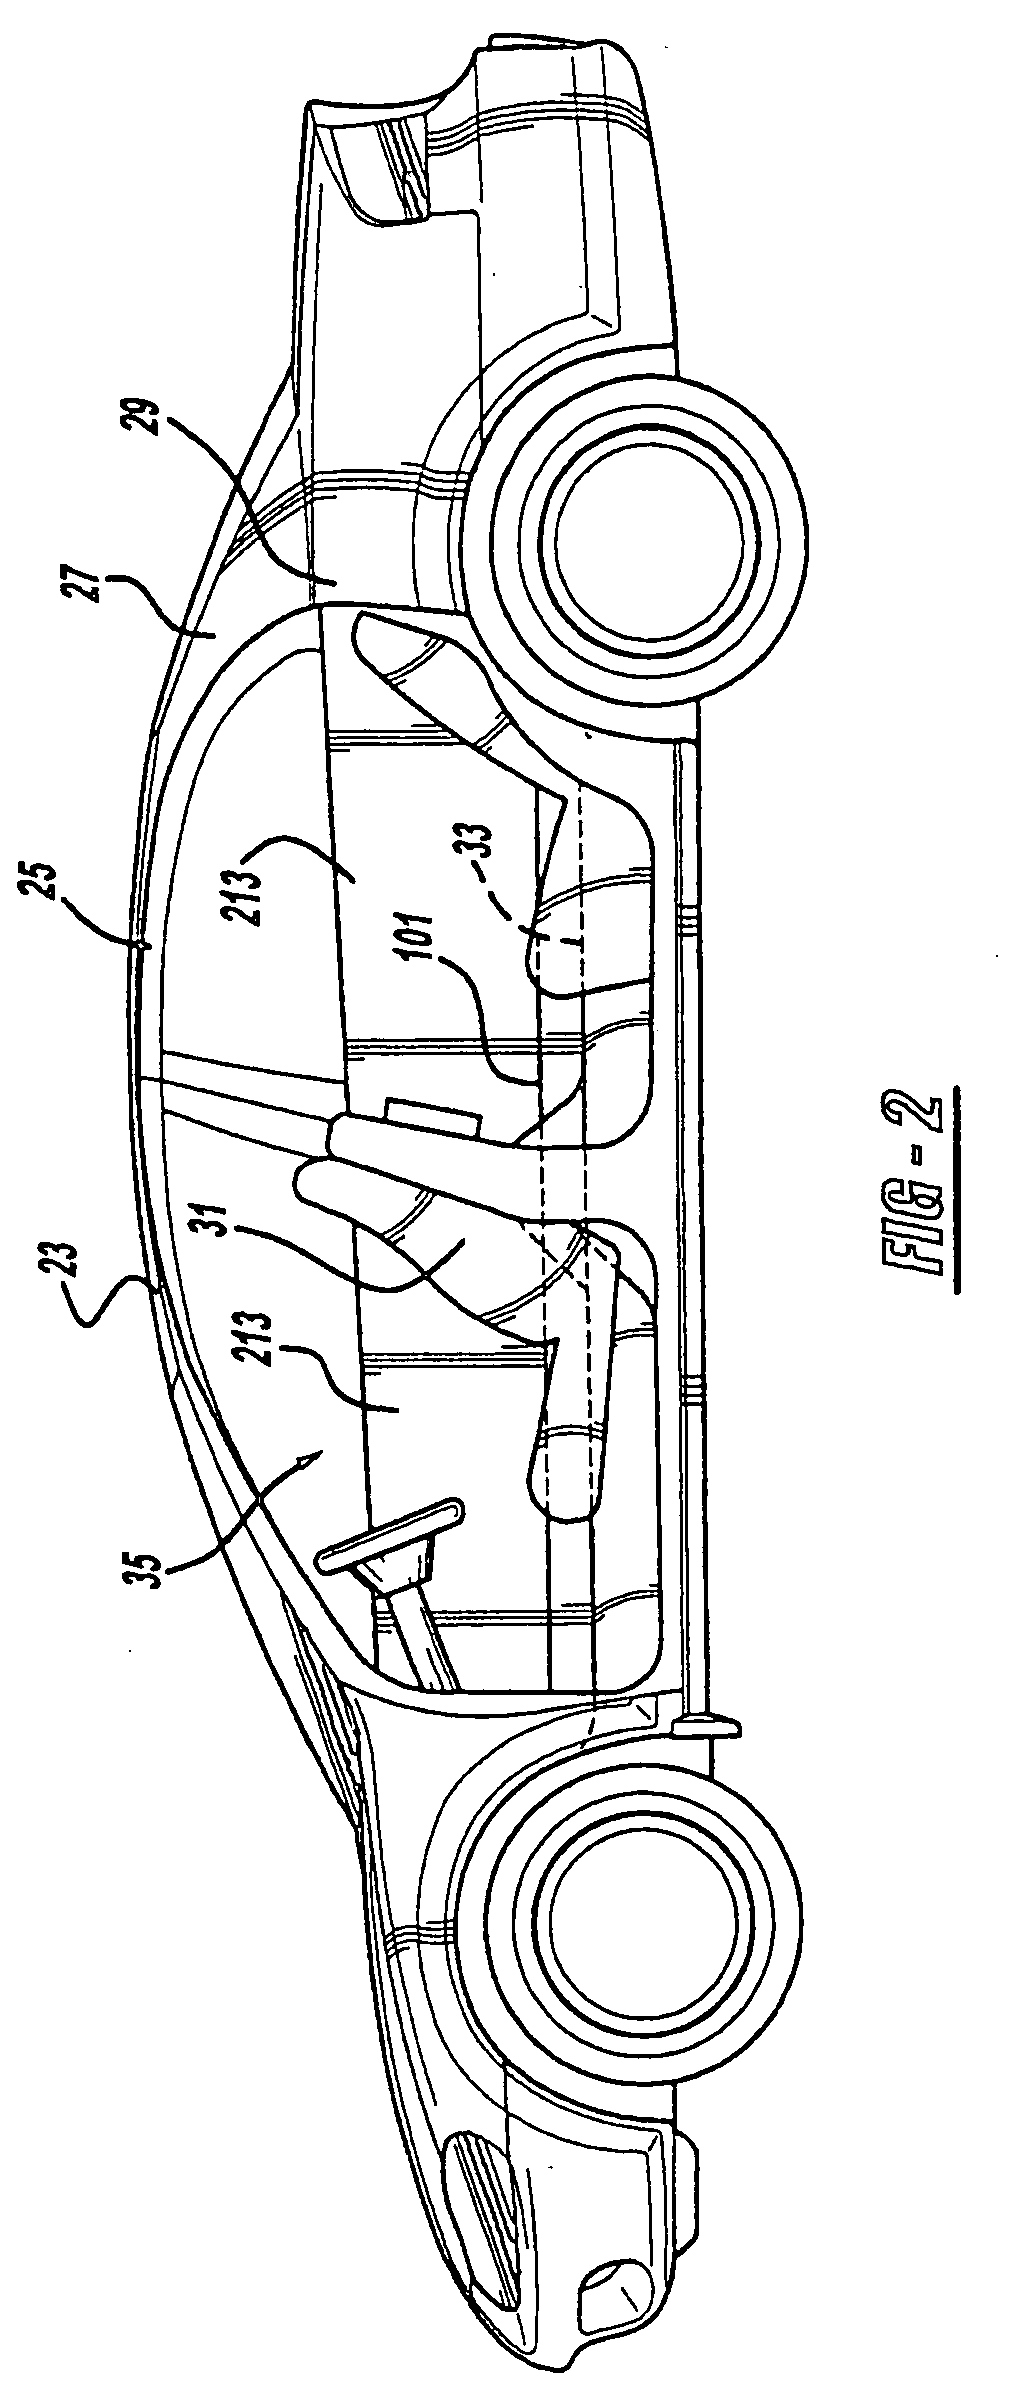 Structural reinforcement system for an automotive vehicle